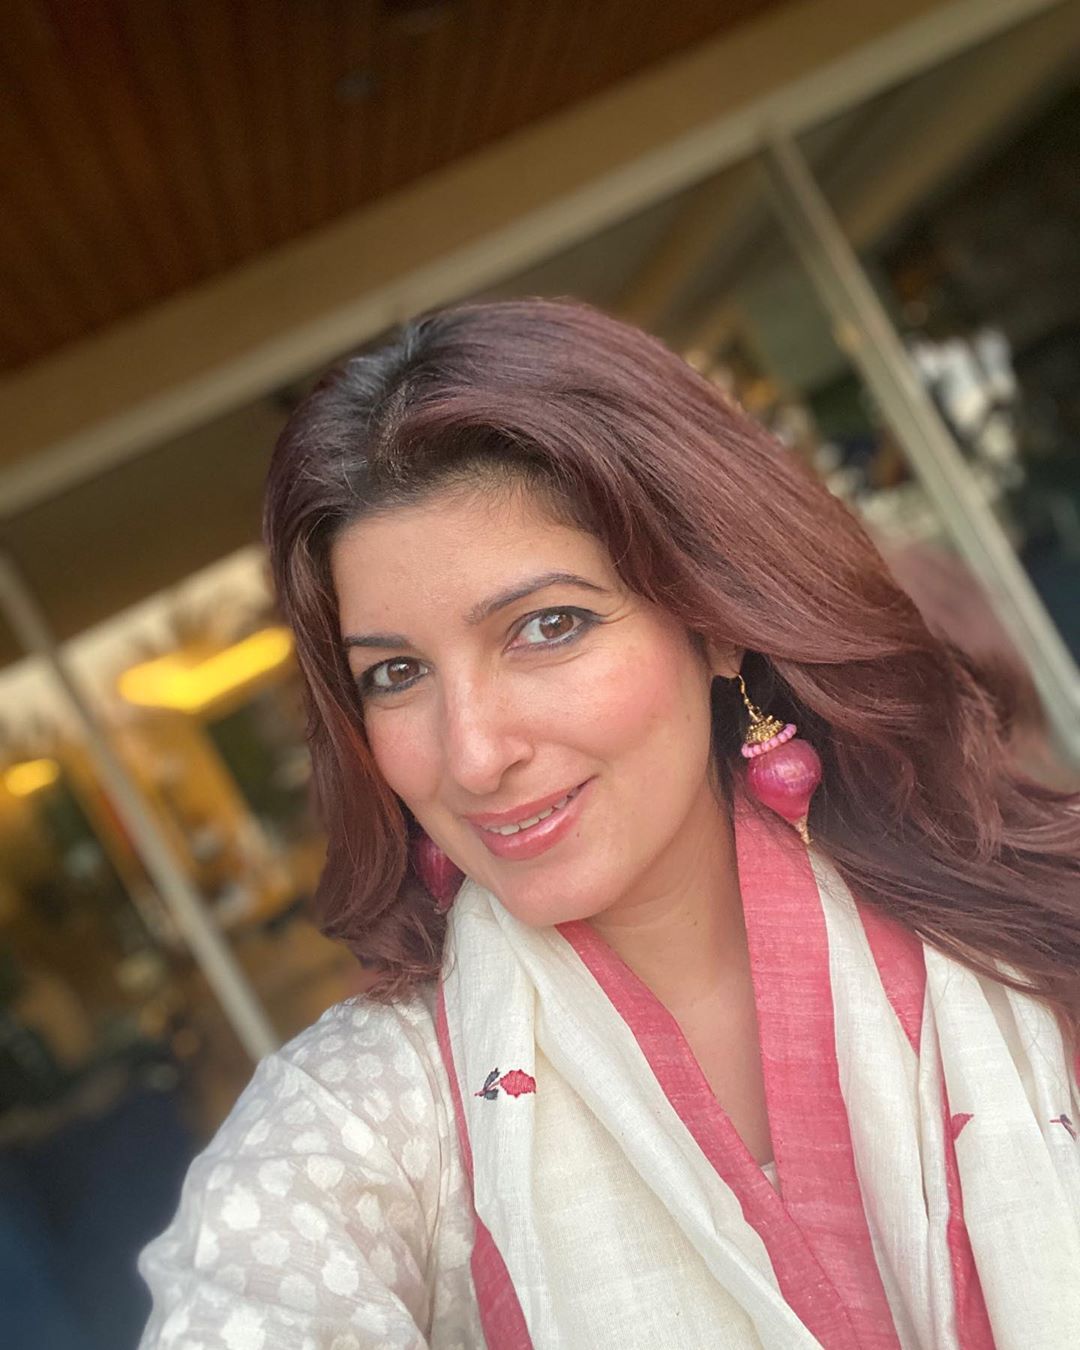 Twinkle Khanna Flaunts Her Onion Earrings In A New Picture, Says Onions Are A Girl's Best Best Friend